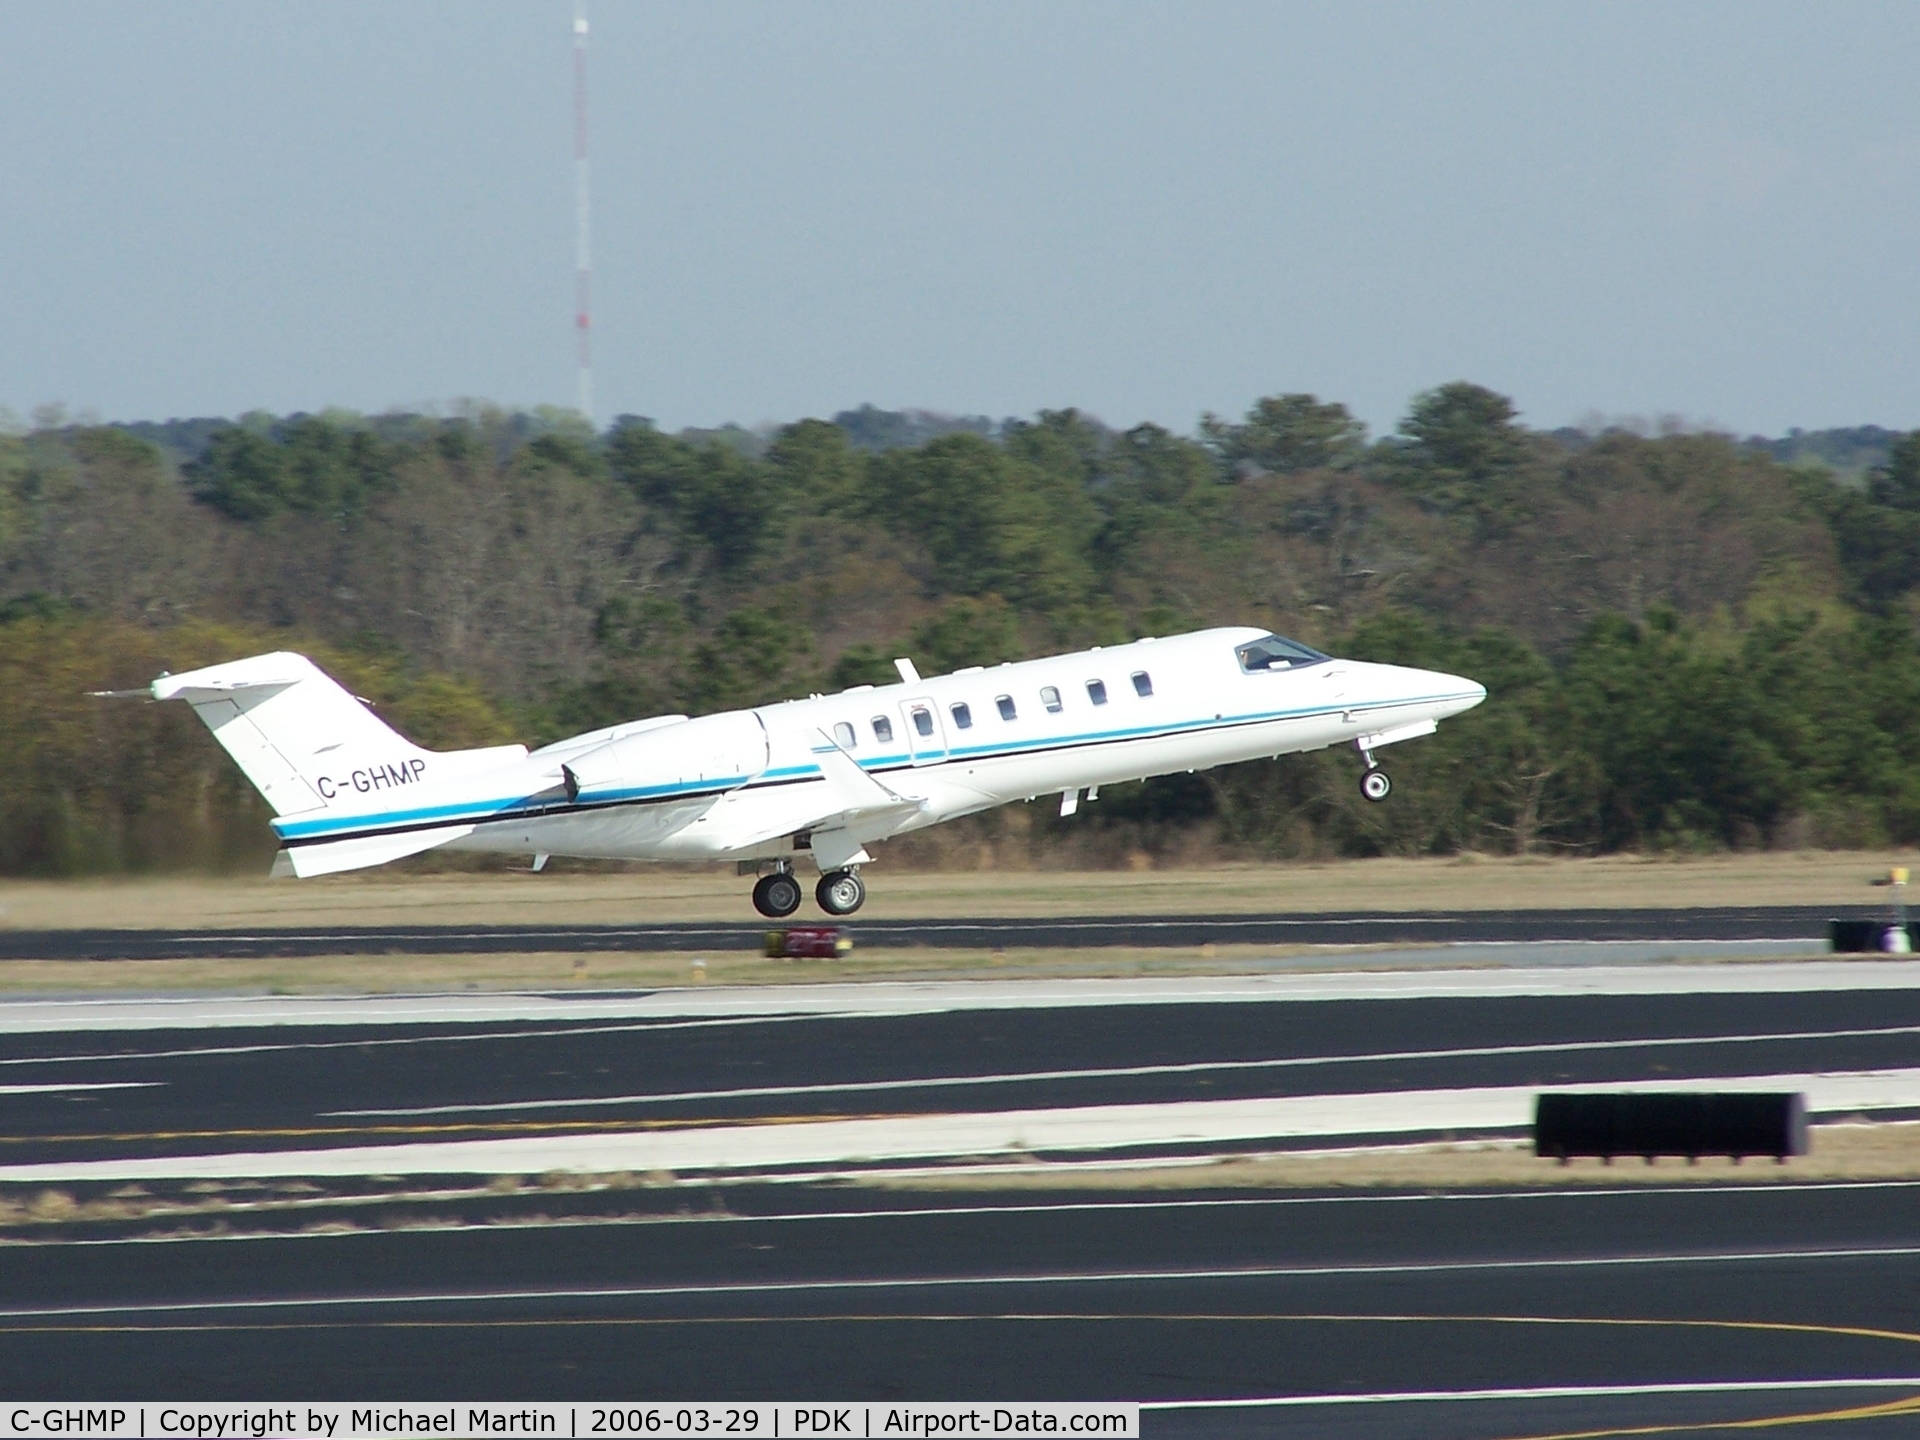 C-GHMP, 2001 Learjet 45 C/N 183, Departing PDK enroute to CYSG